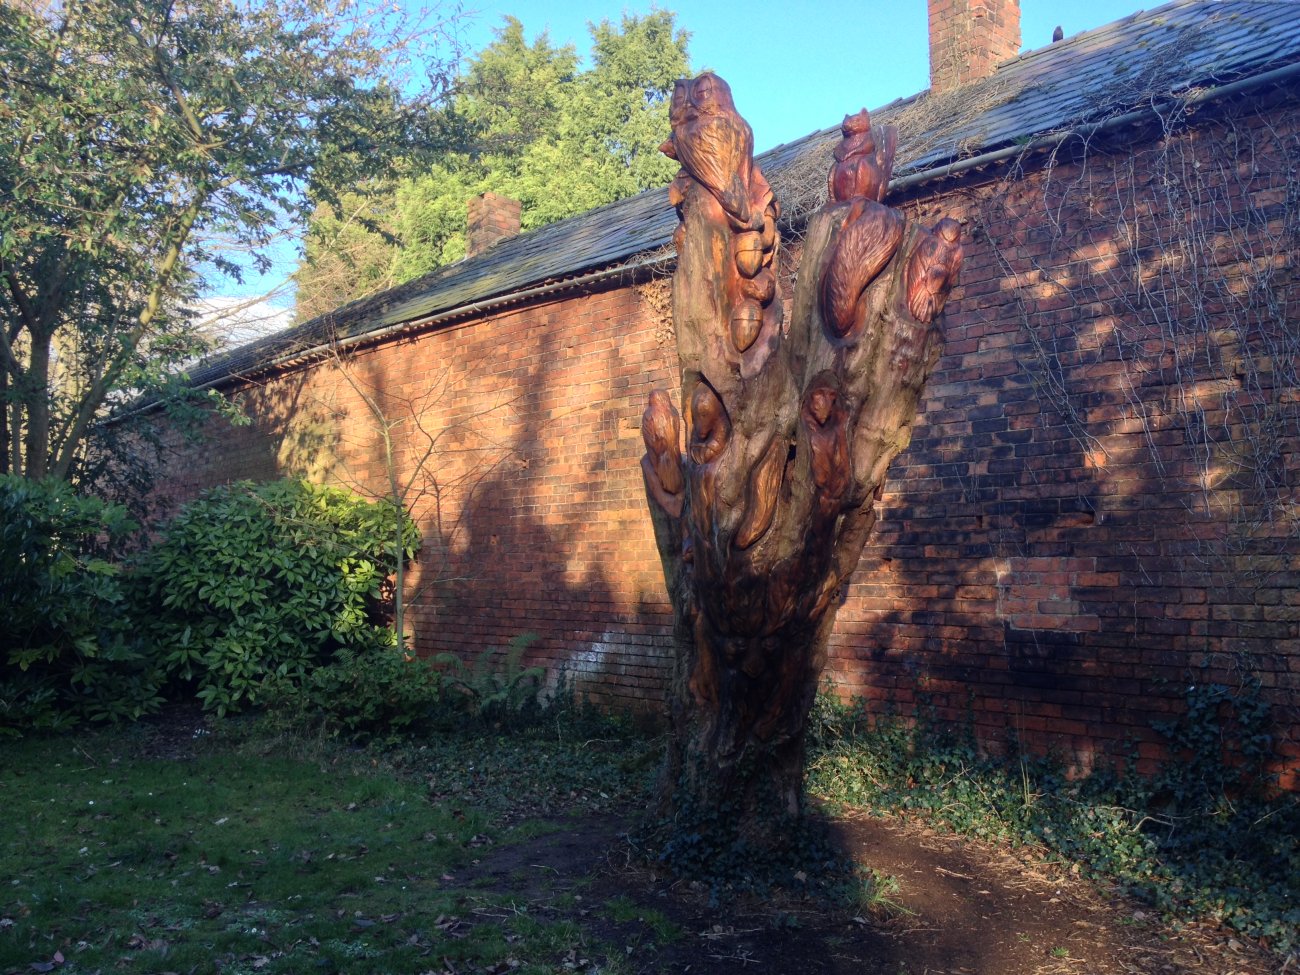 Photograph of Tree carving in the Sensory Garden